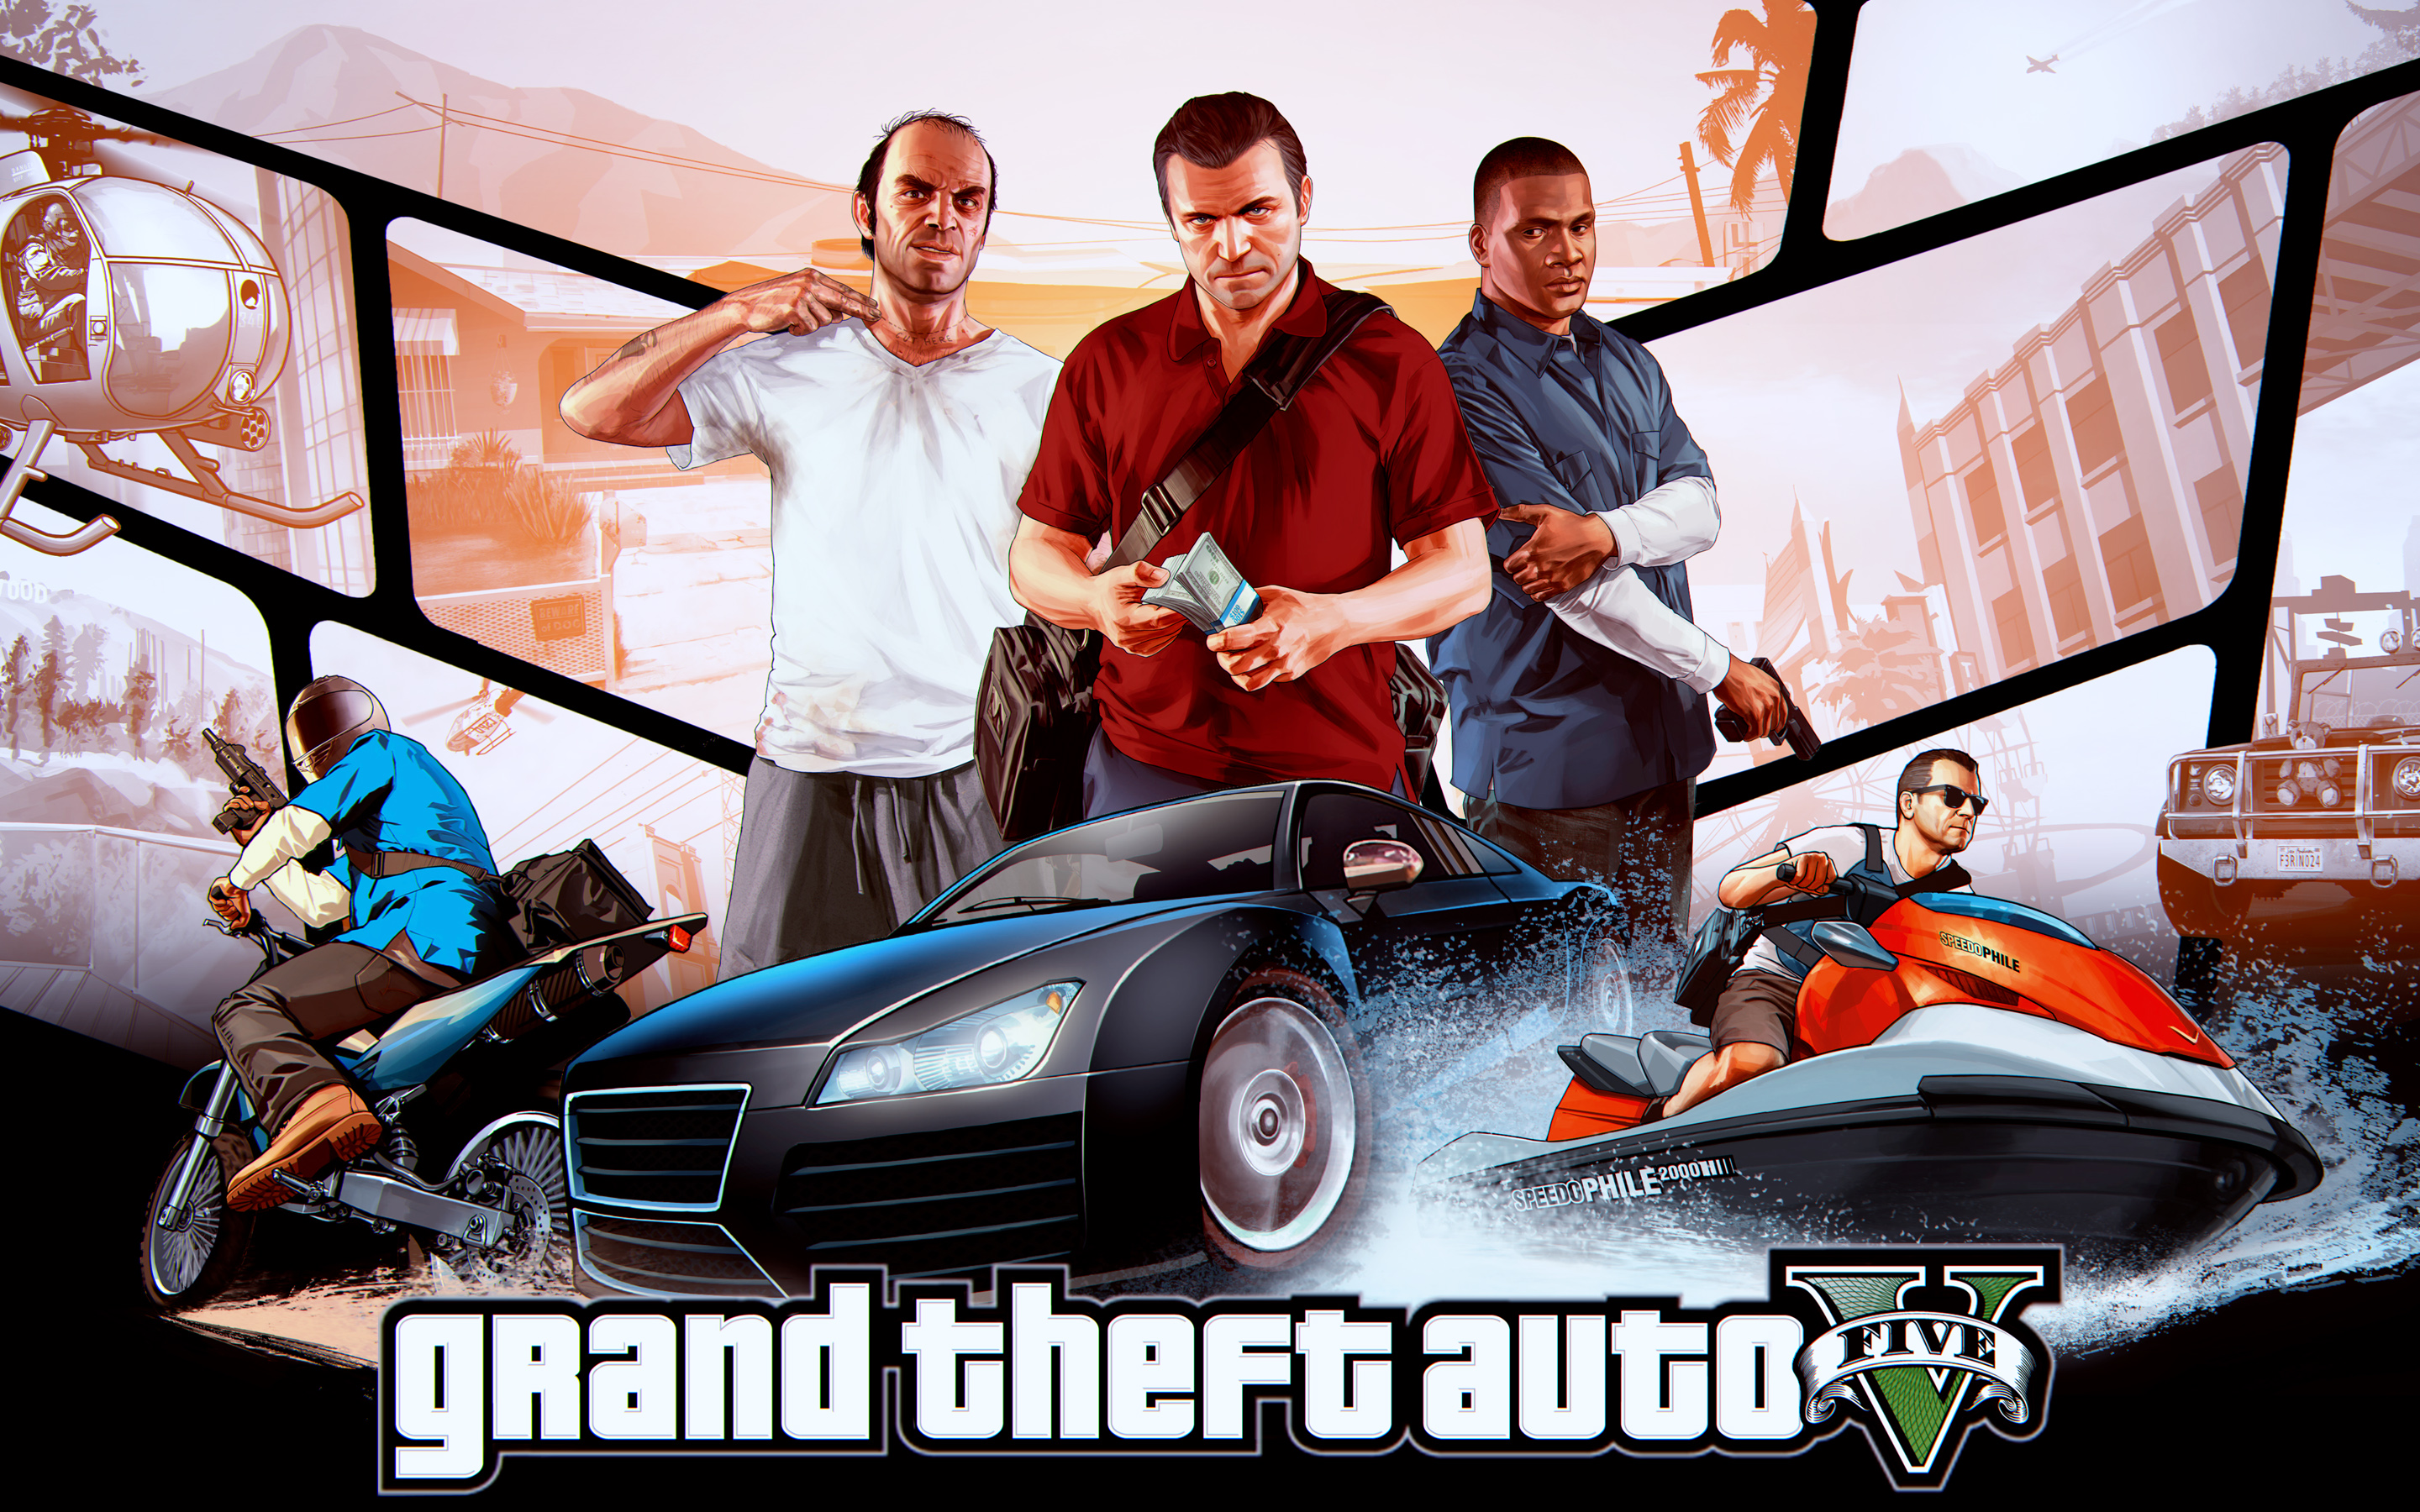 Grand Theft Auto V Wallpapers HD Wallpapers